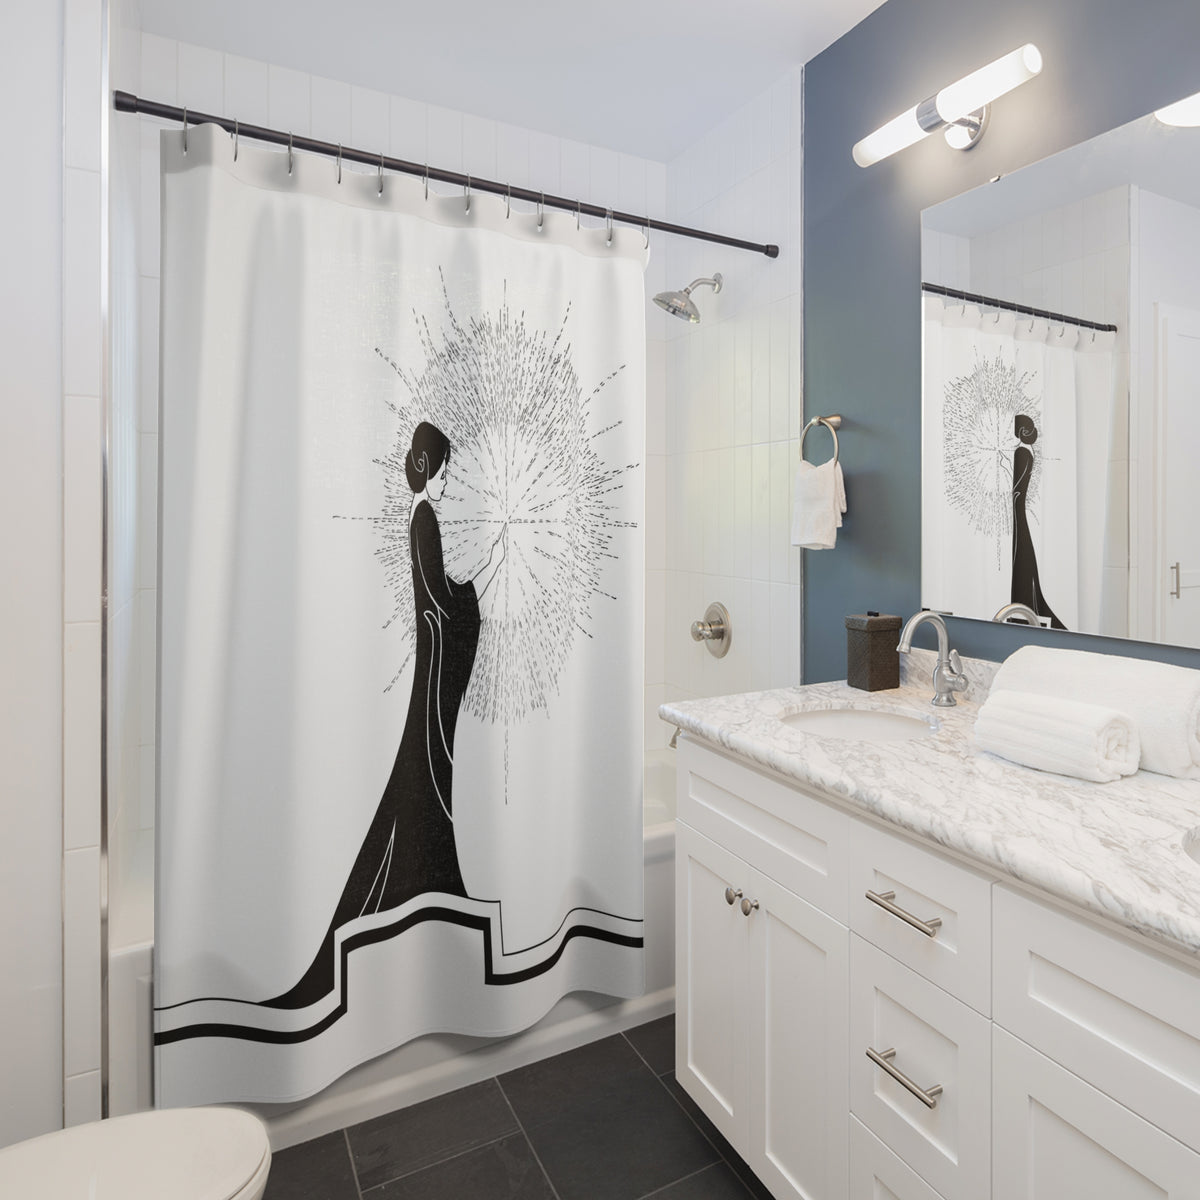 bathroom view showing a shower curtain design of an ink drawing of a woman touching the spark of creation in an Art Deco style